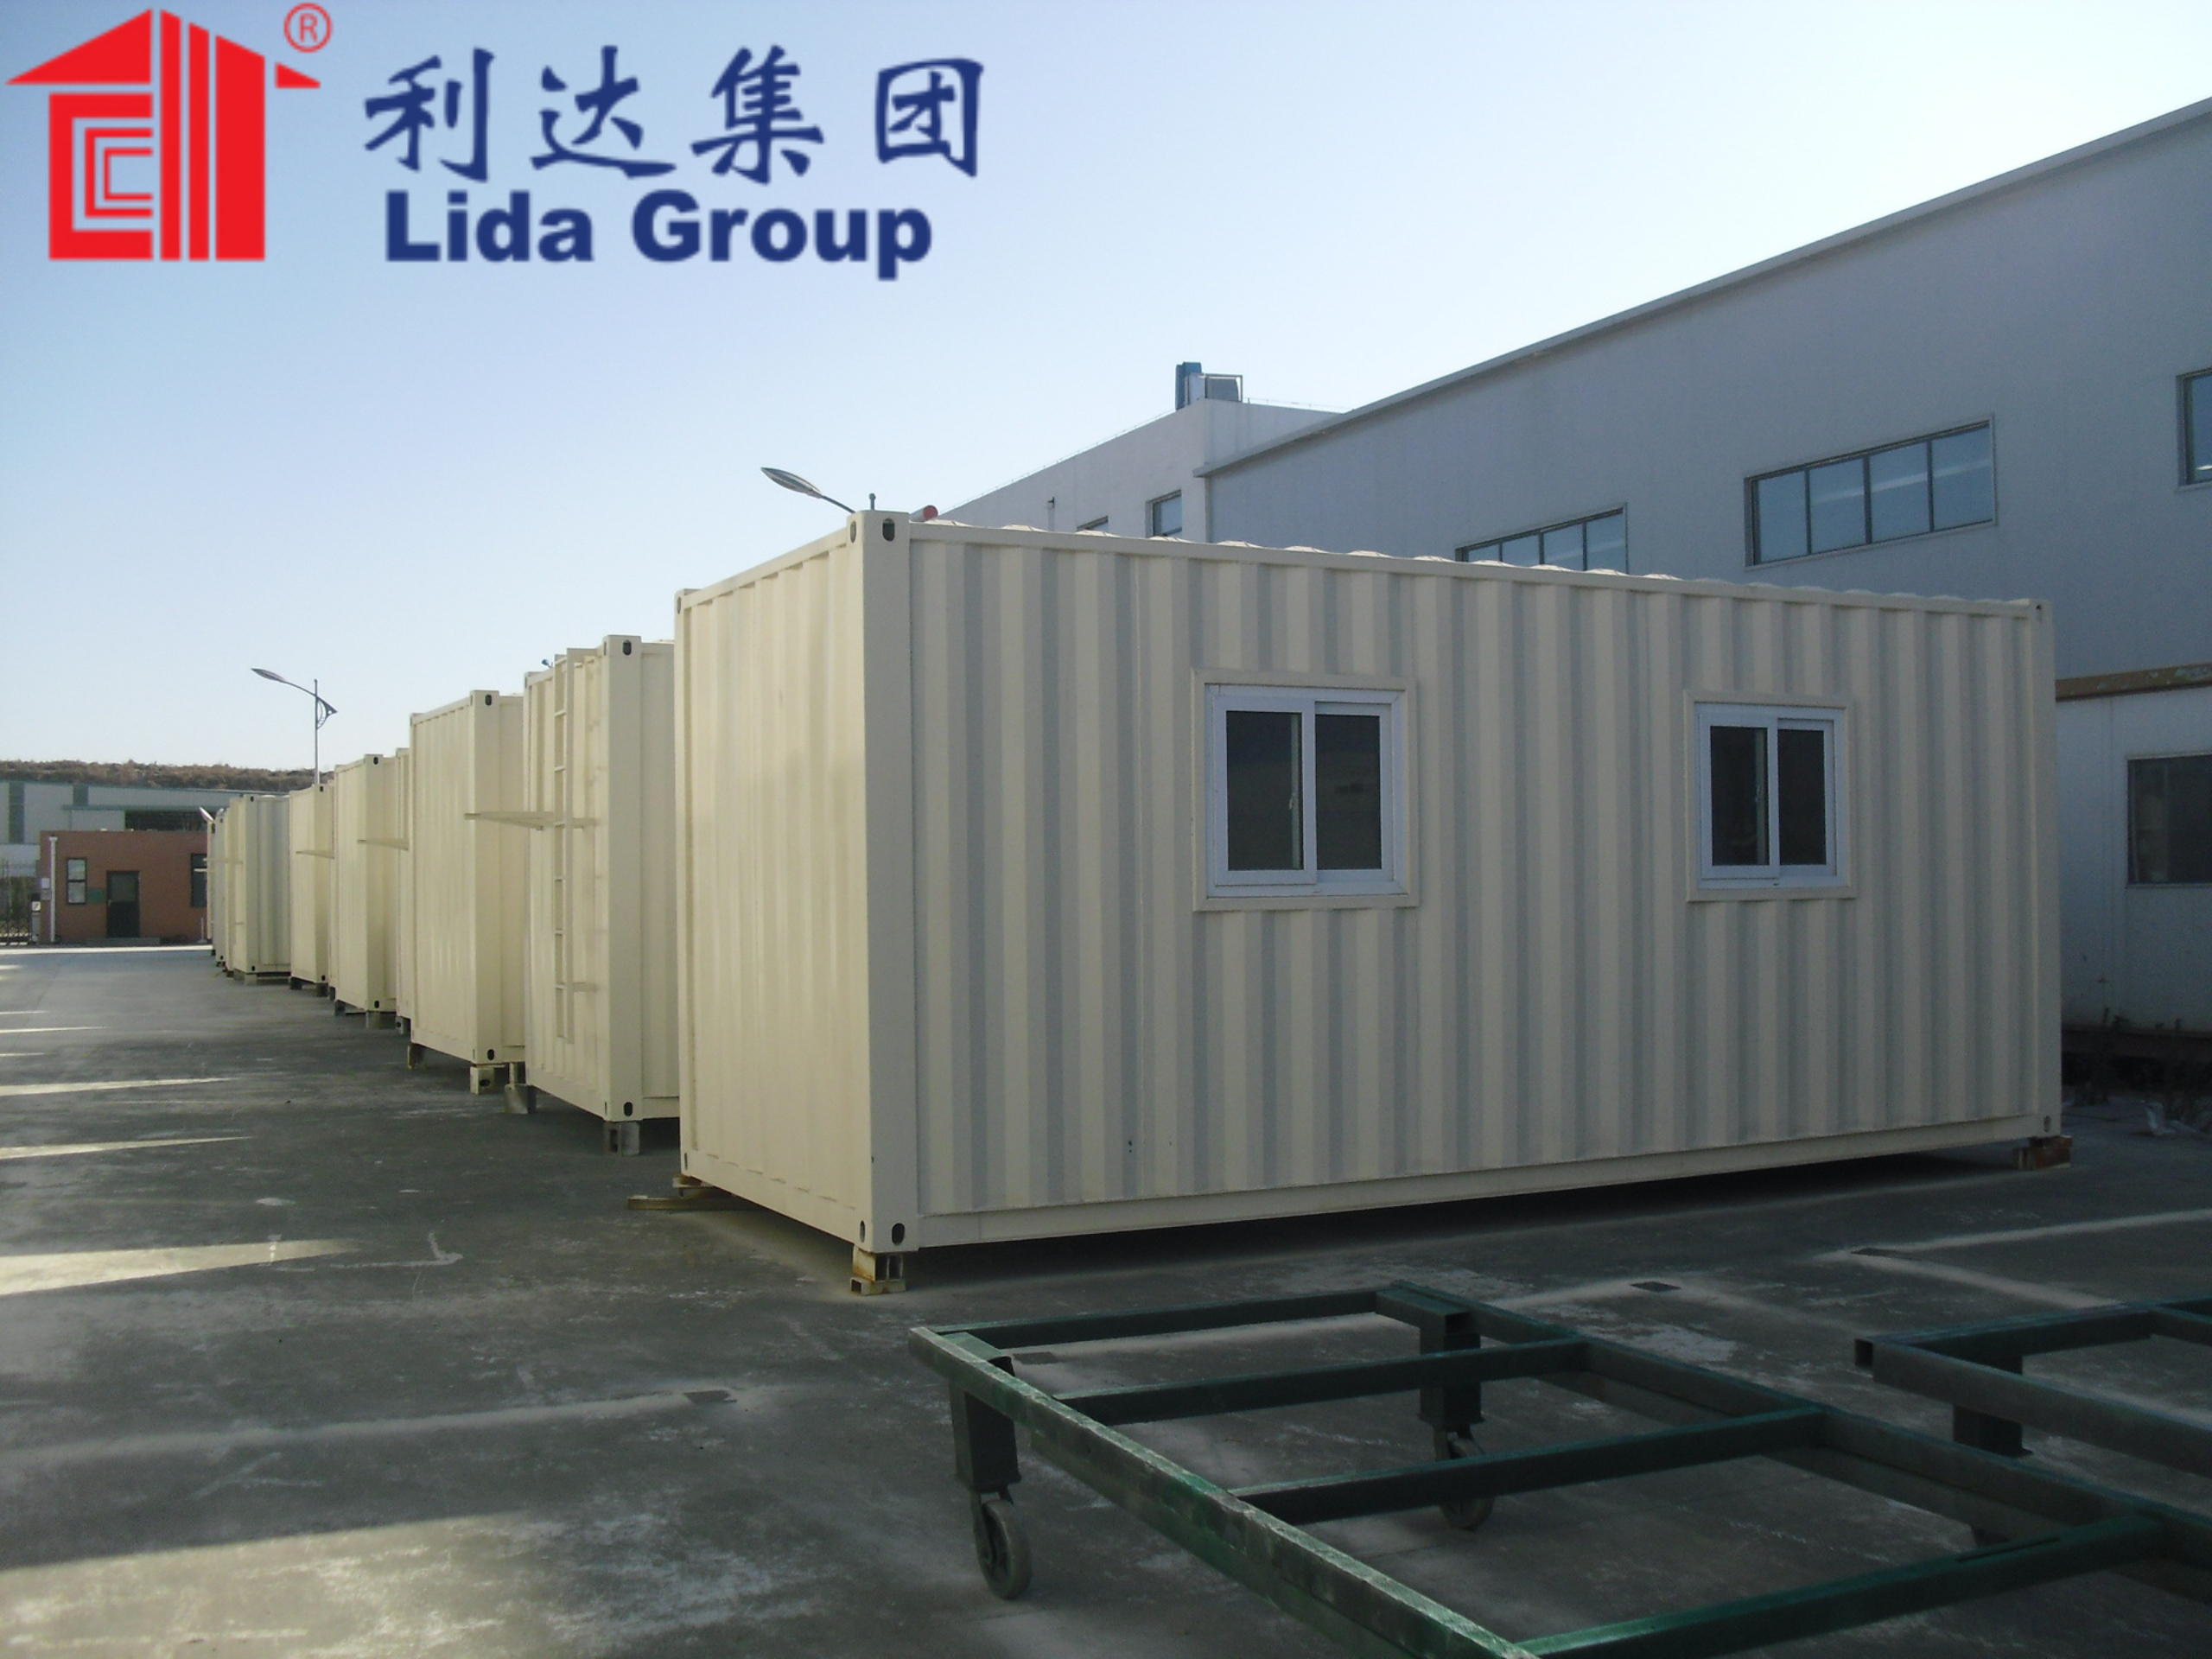 New prefabricated temporary buildings made from recycled steel shipping containers show potential as cheap and long lasting emergency housing in developing countries according to research sponsored by Lida Group